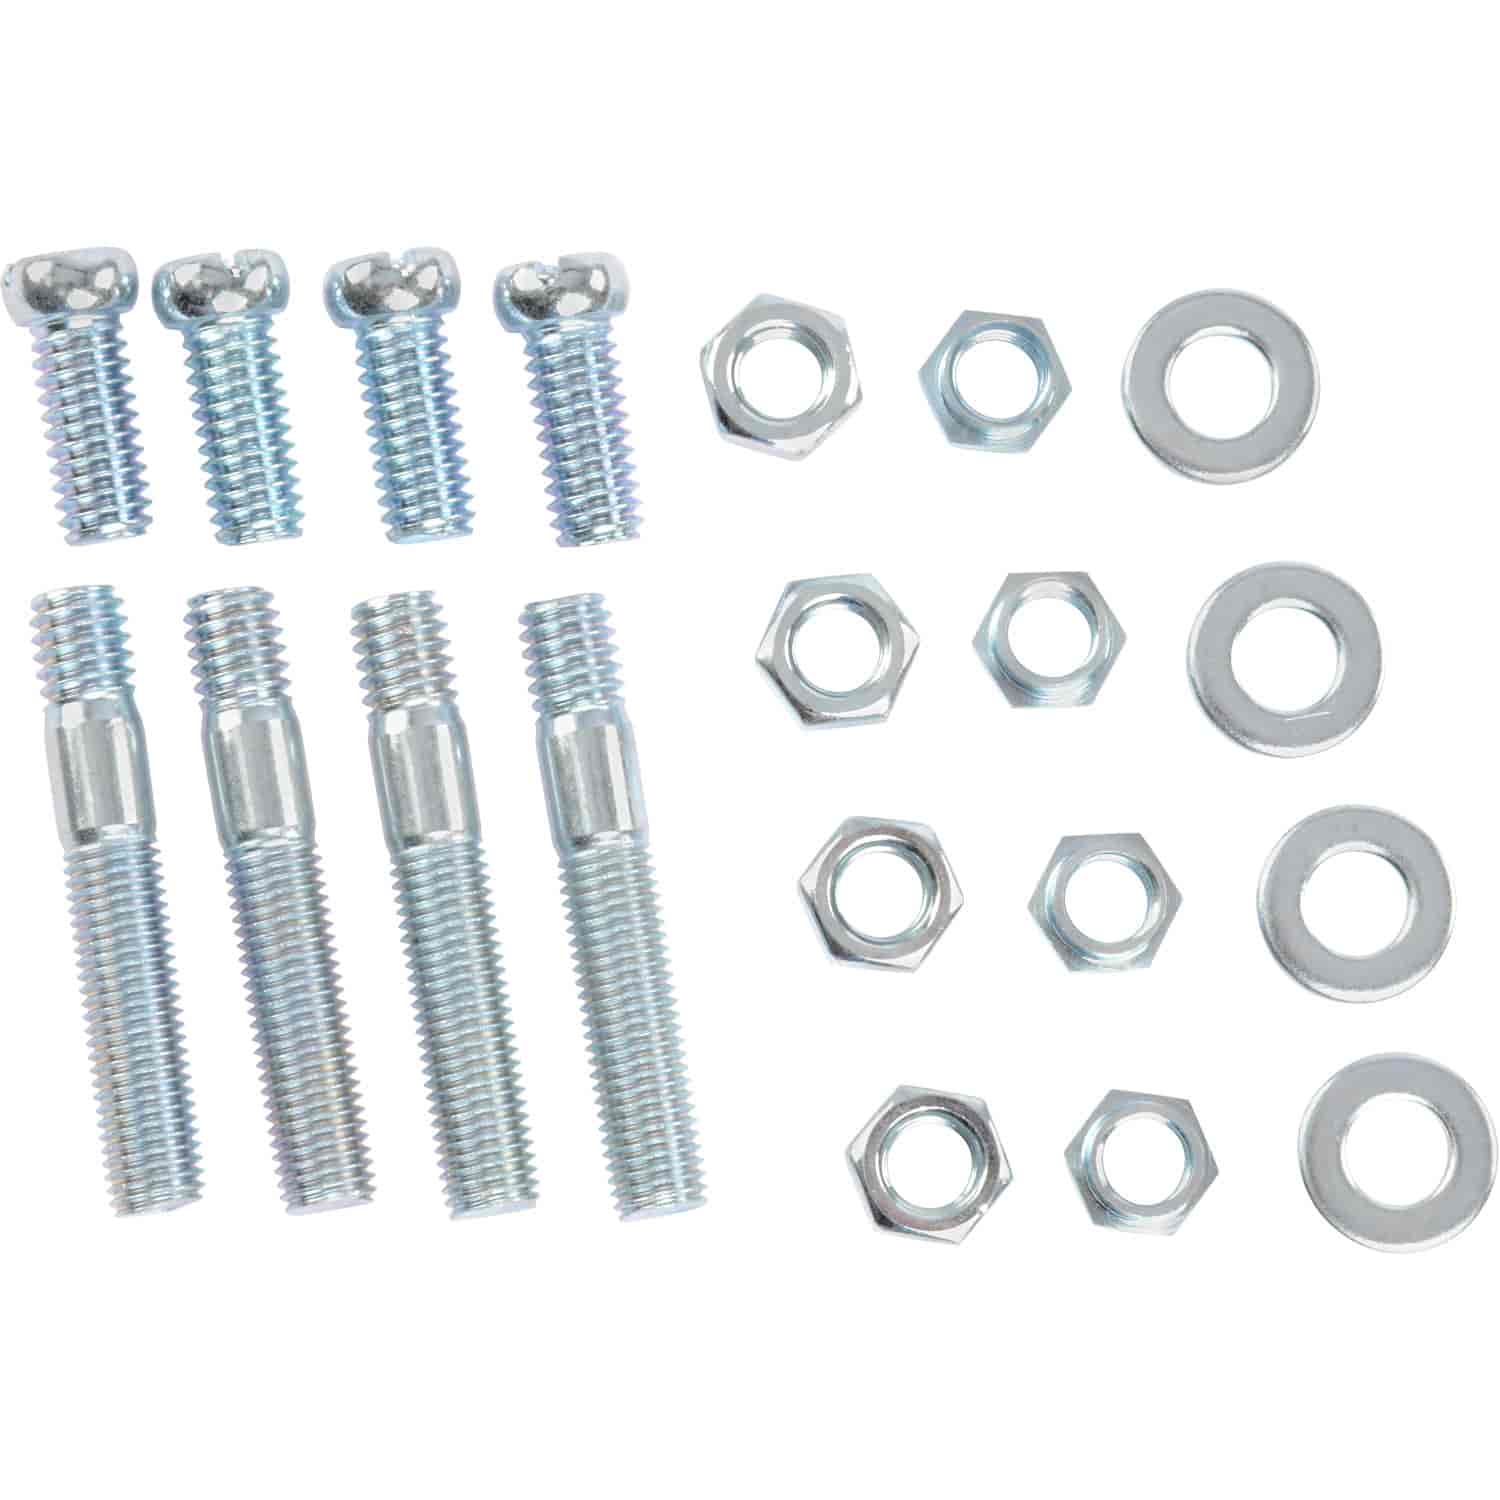 Carburetor Adapter Installation Kit For use with all